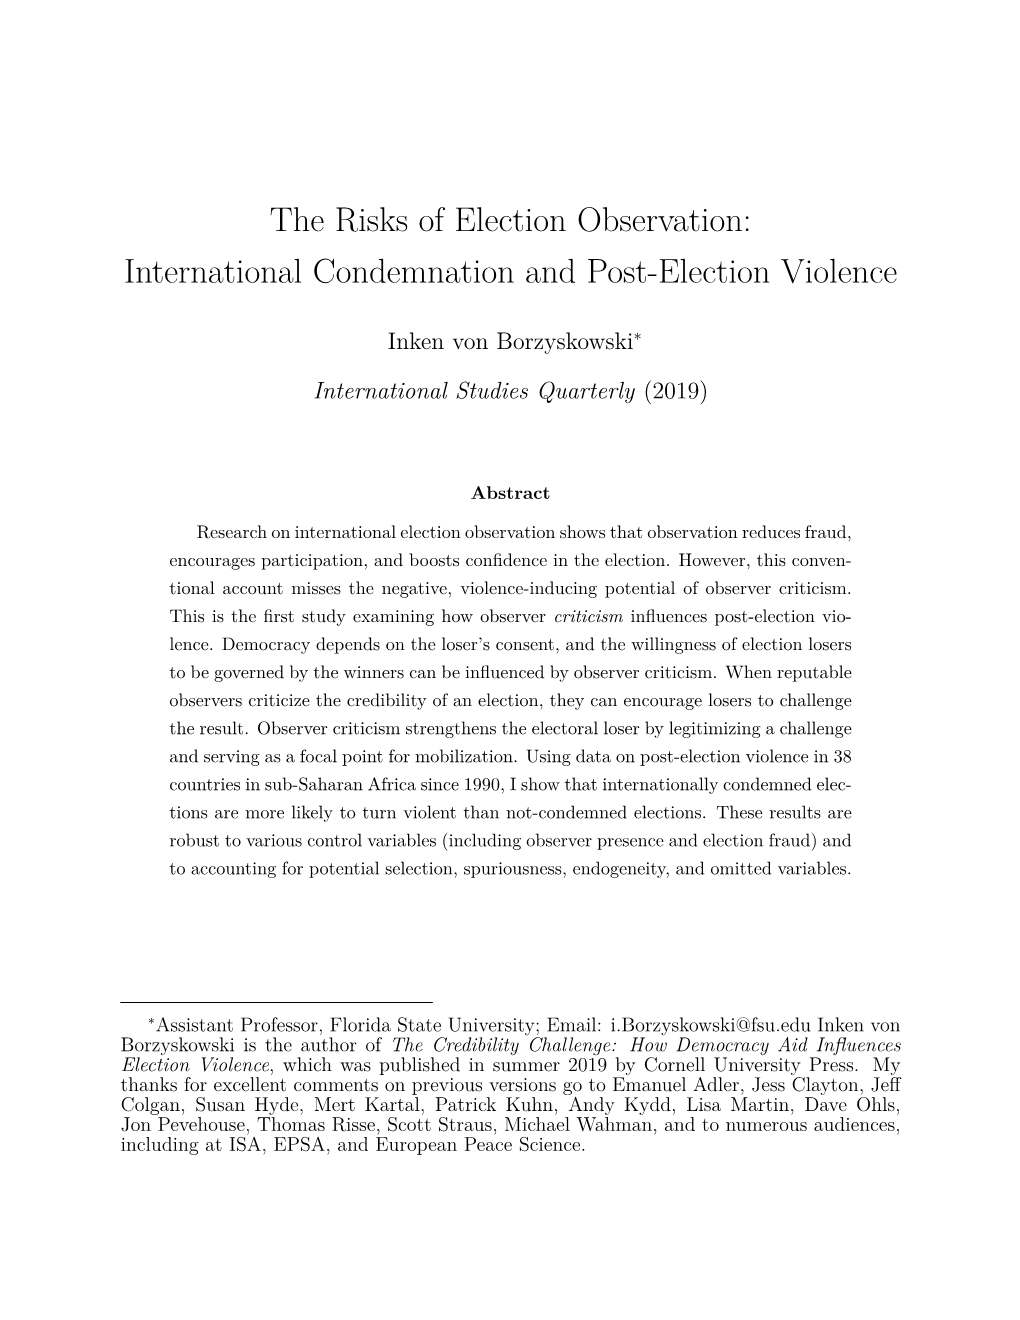 International Condemnation and Post-Election Violence